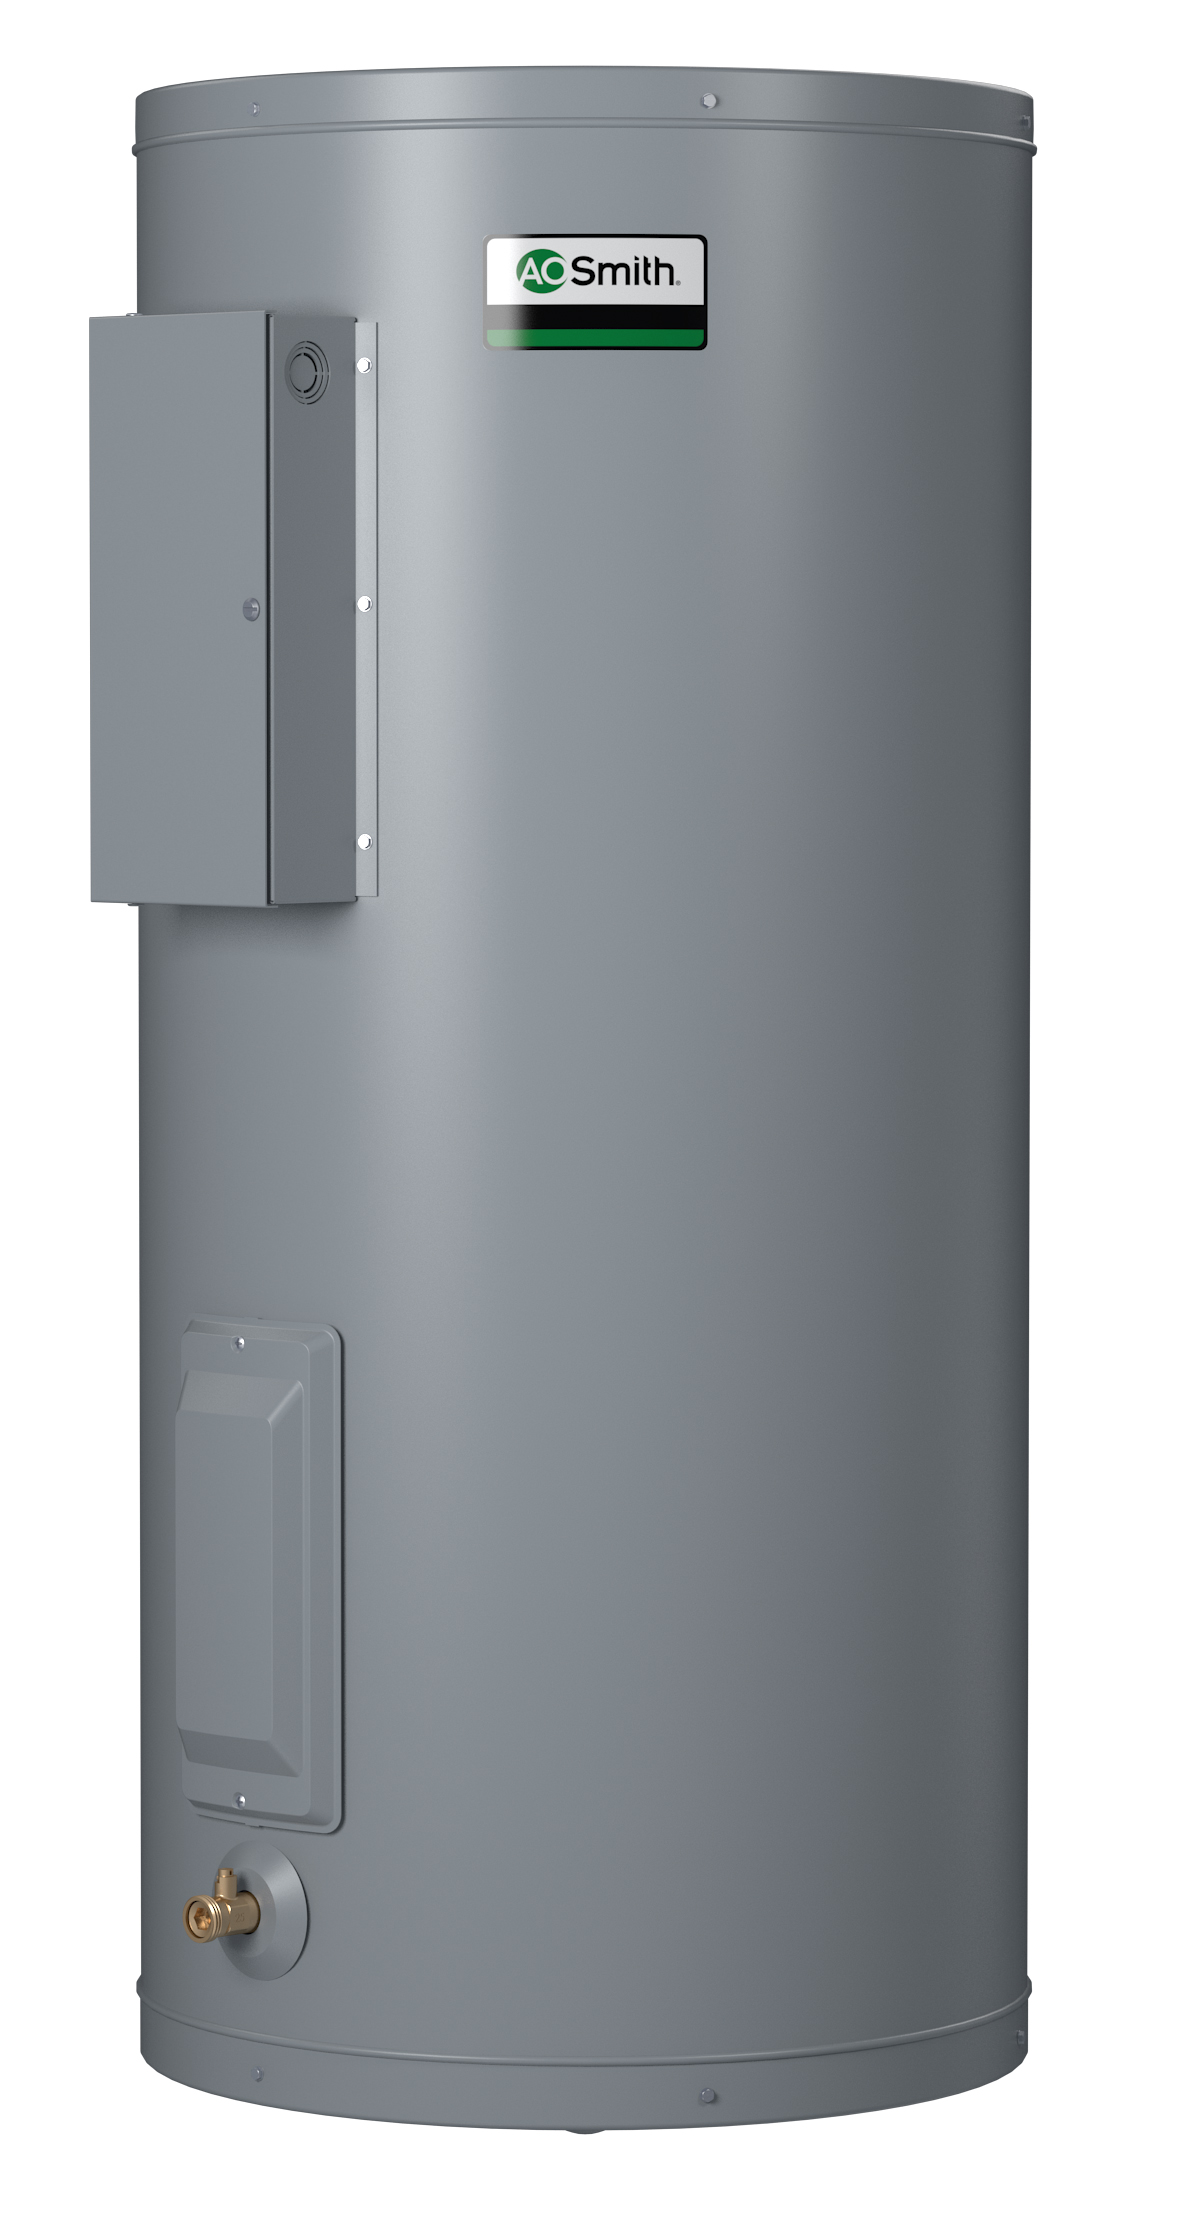 AO SMITH DEN-120D: 120 GALLONS, 2.5 KW, 208 VOLT, 3 PHASE, (2-2500 WATT ELEMENTS, NON-SIMULTANEOUS WIRING), DURA-POWER, LIGHT DUTY COMMERCIAL ELECTRIC WATER HEATER